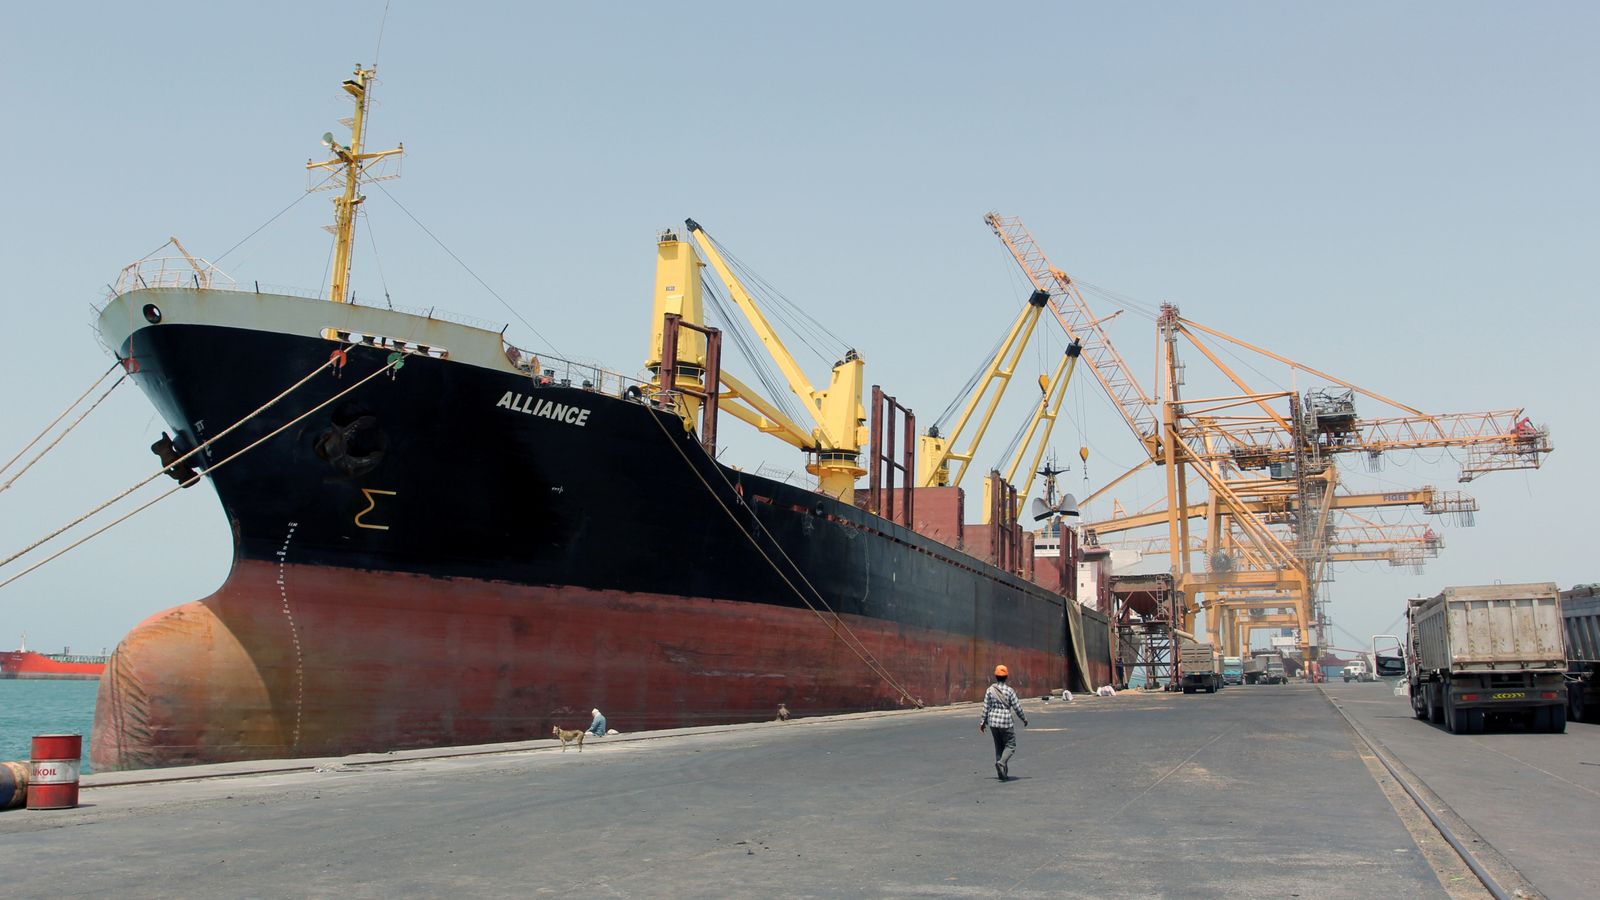 Traffic grows in Red Sea as more shipping firms risk delays and increased costs by diverting routes